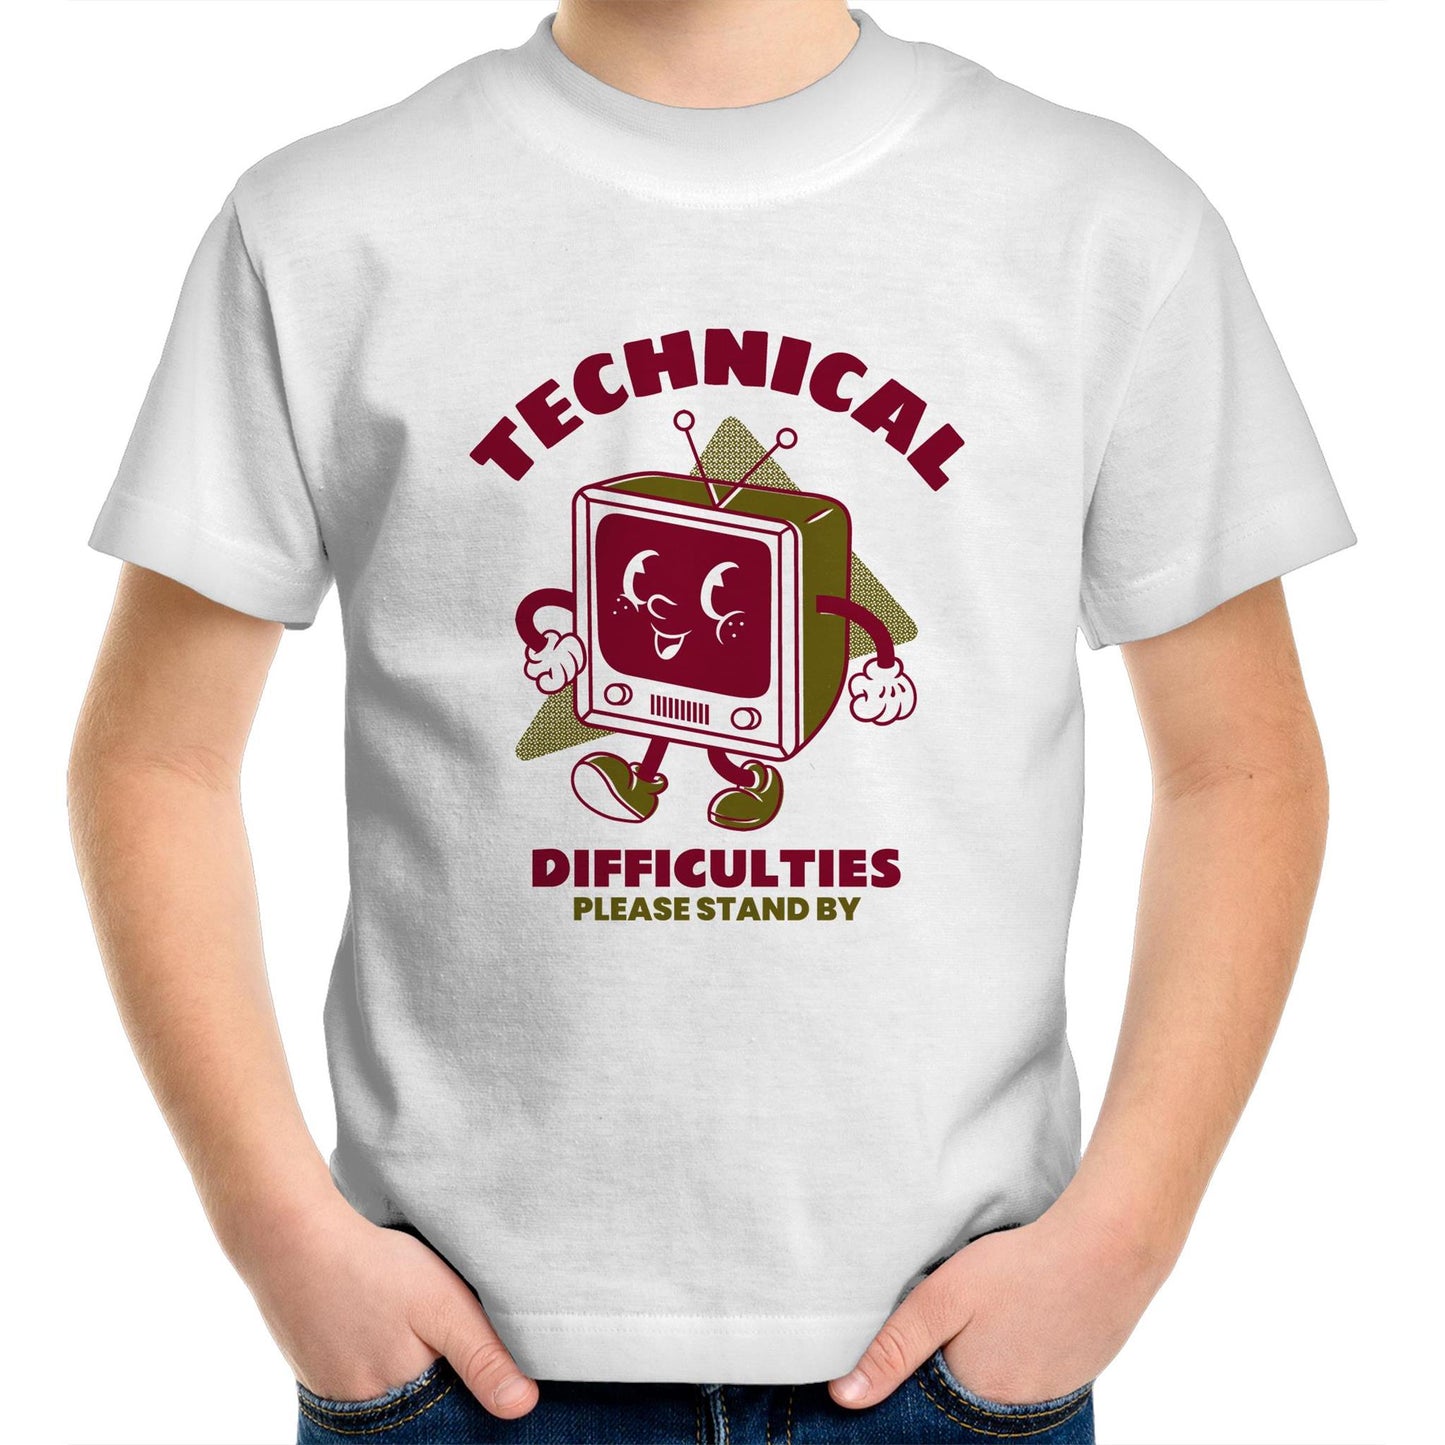 Retro TV Technical Difficulties - Kids Youth Crew T-Shirt White Kids Youth T-shirt Retro Tech